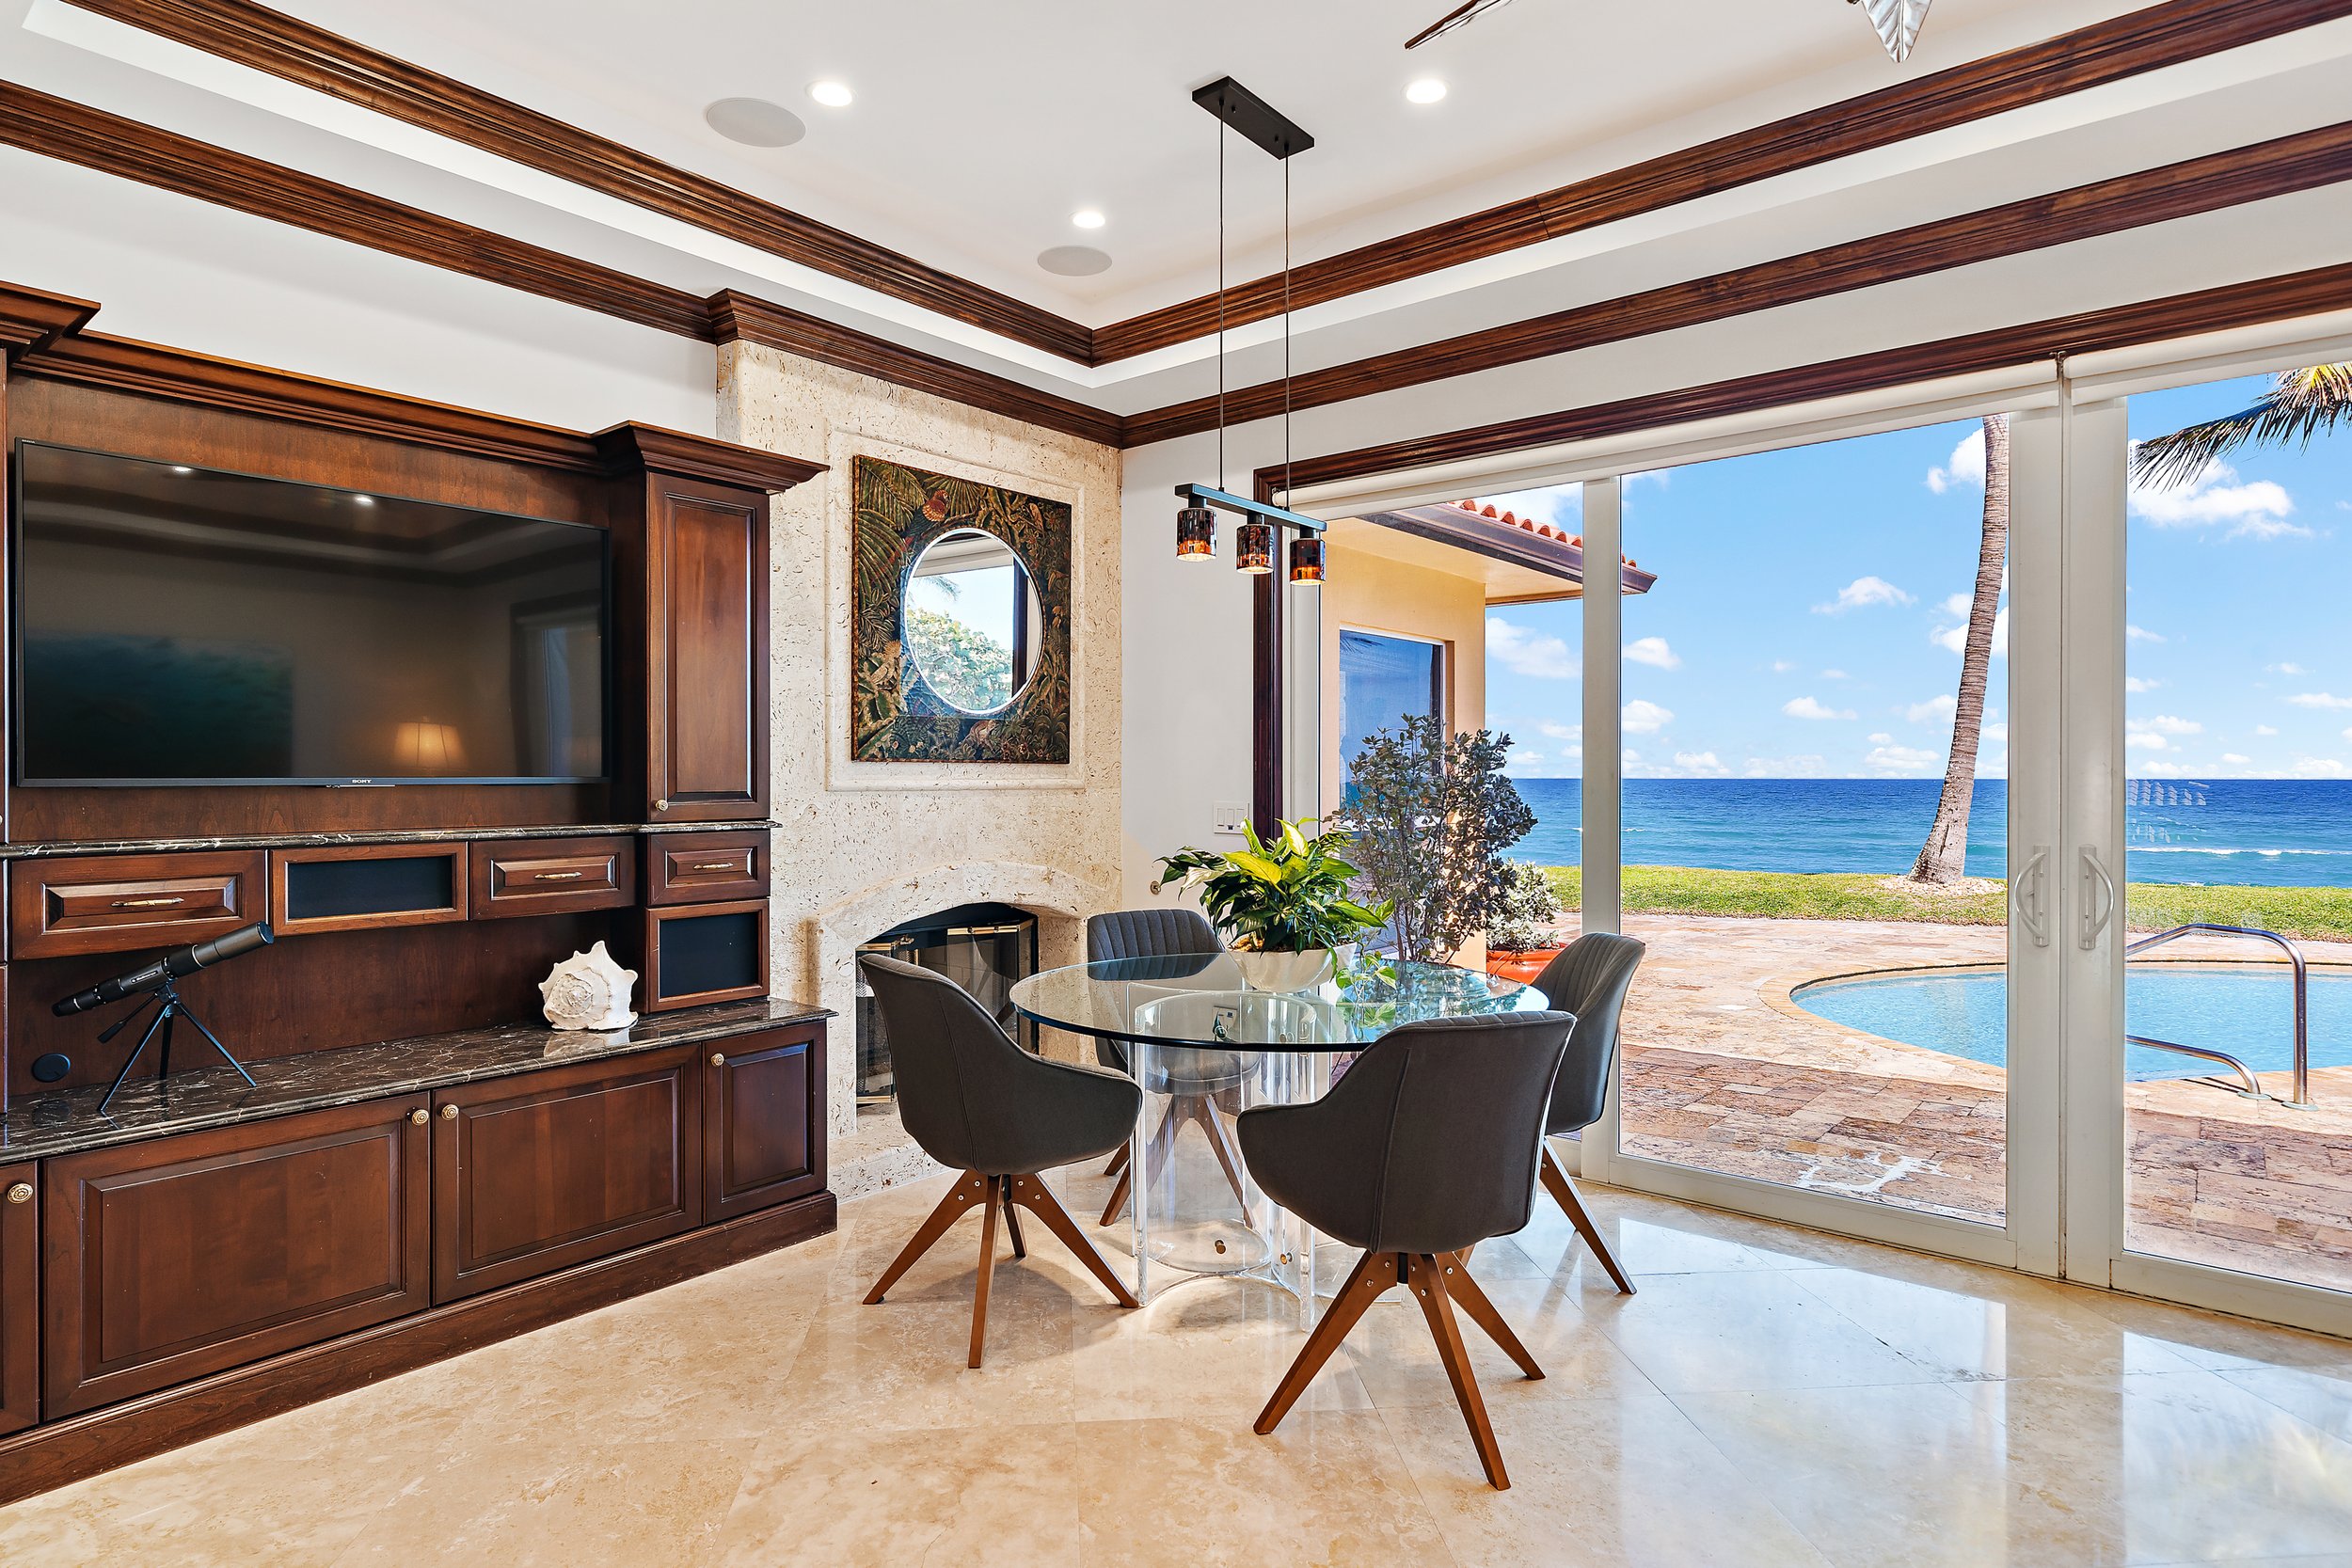 Tour A Jupiter Beachfront Mansion Owned By Clyde R. %22Buzz%22 Gibb Which Is Asking $24.9 Million 118.jpg